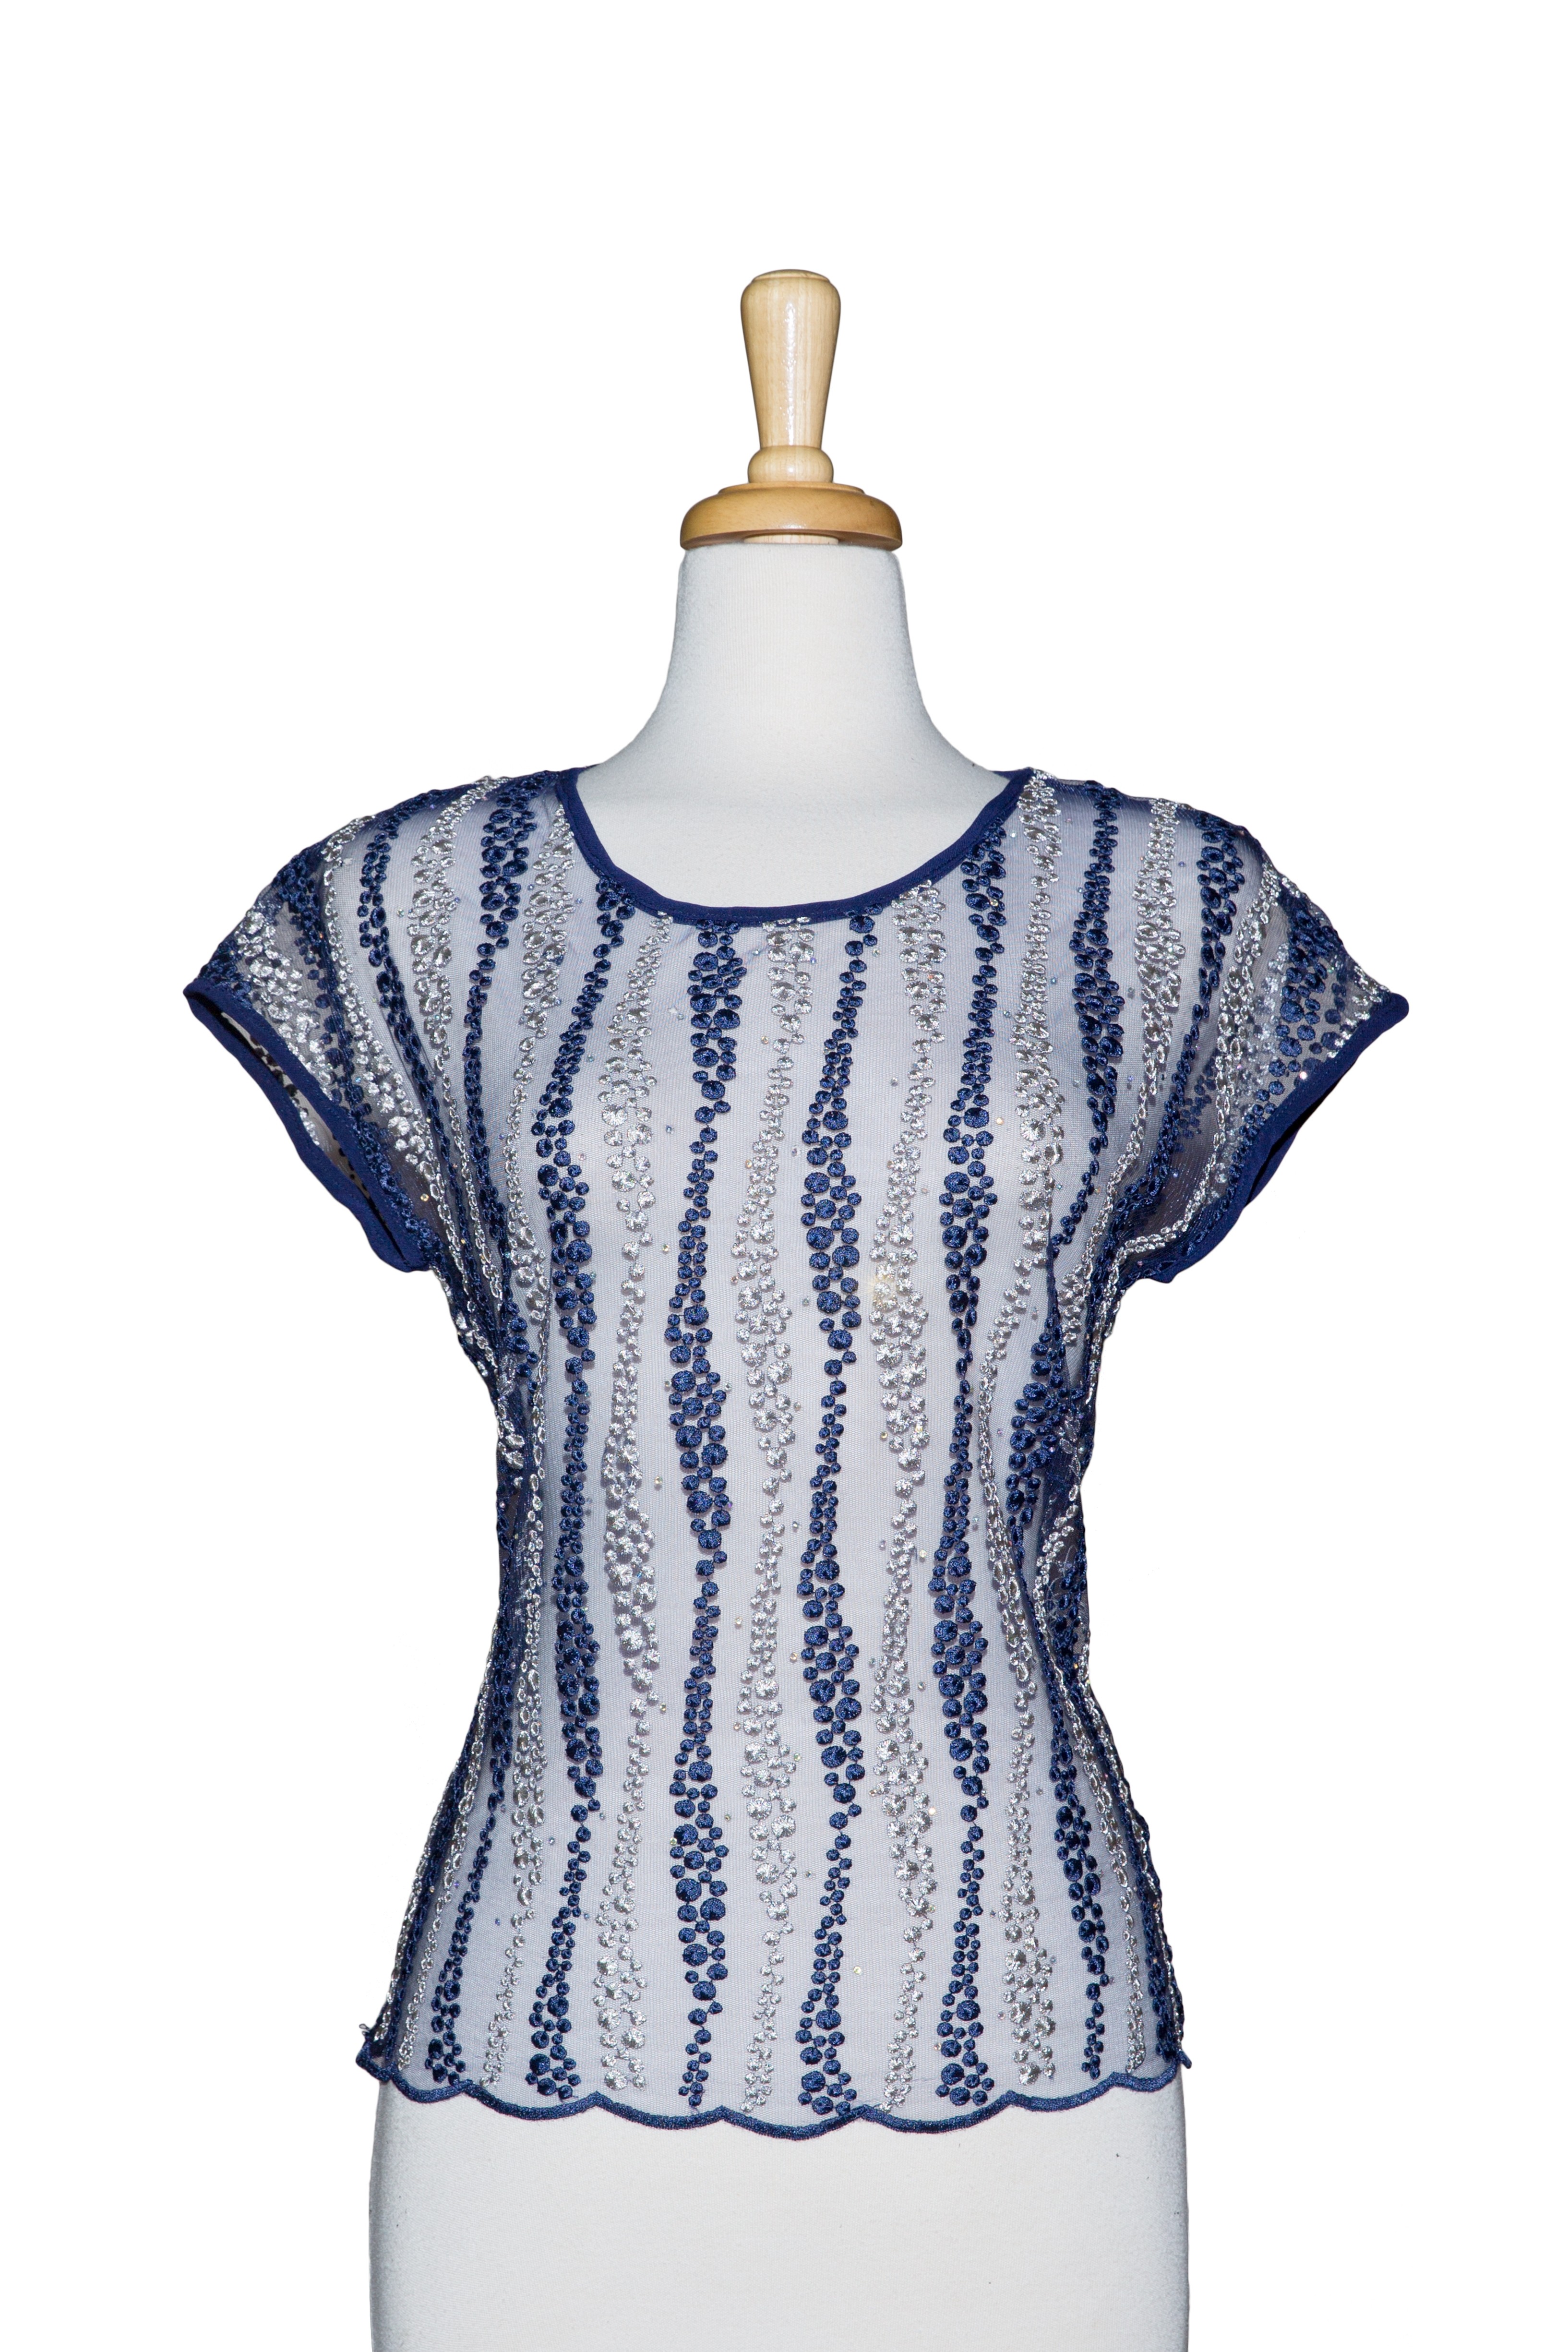 Plus Size Navy and Silver Lace Short Sleeve Top